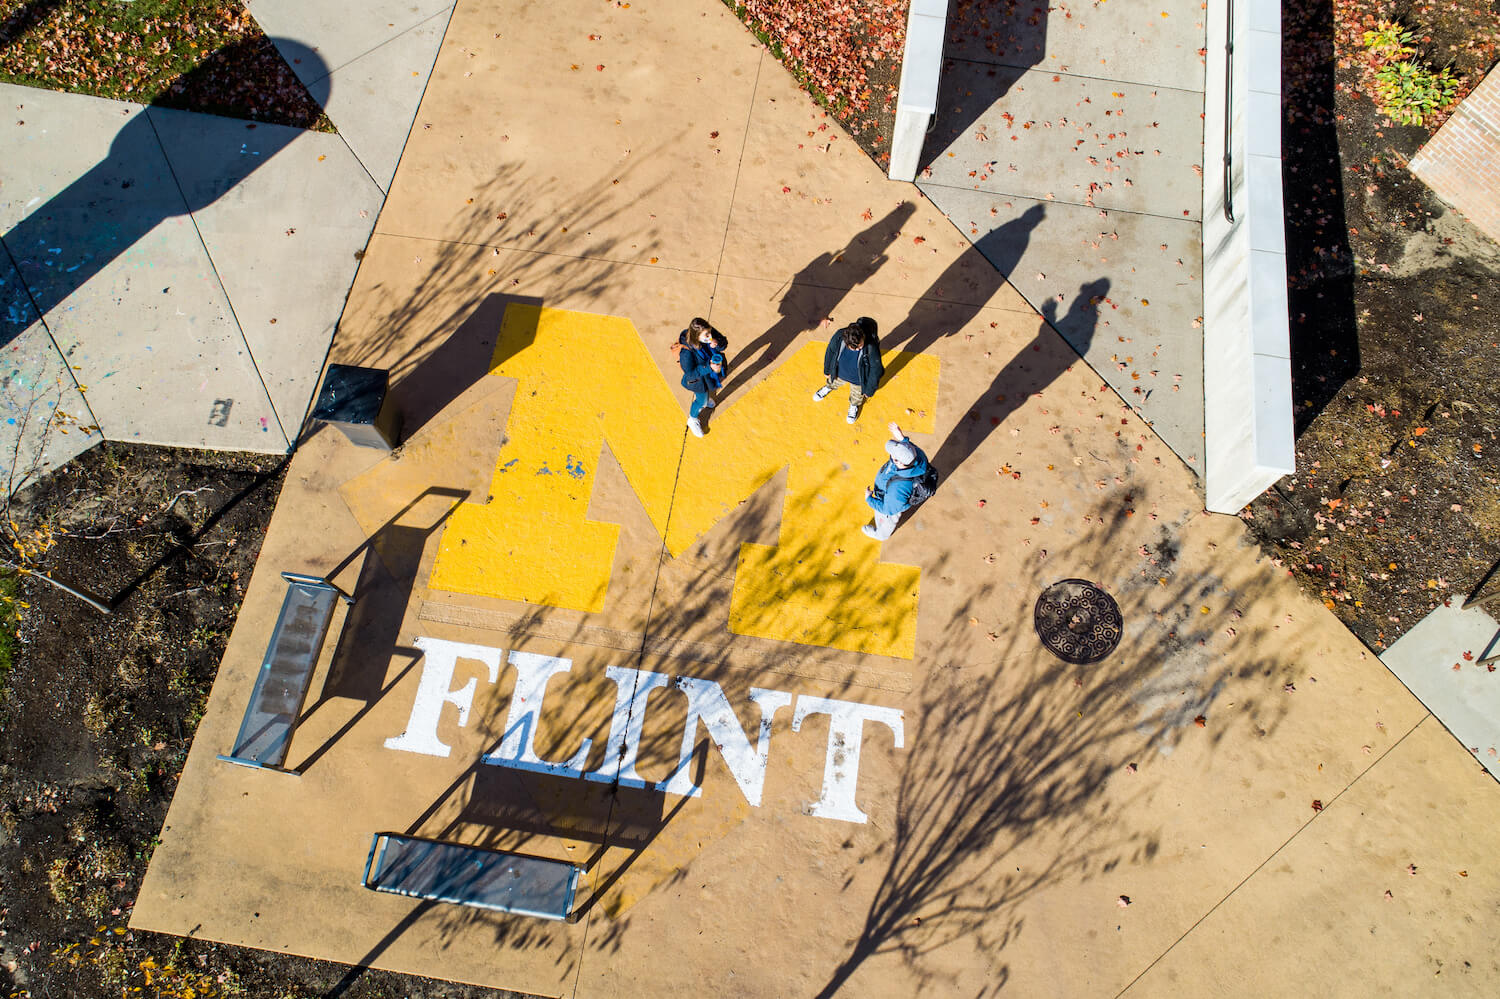 An overhead view of part the University of Michigan-Flint campus in downtown Flint, MI. People are walking over a large block M on the sidewalk with "Flint" written underneath it.